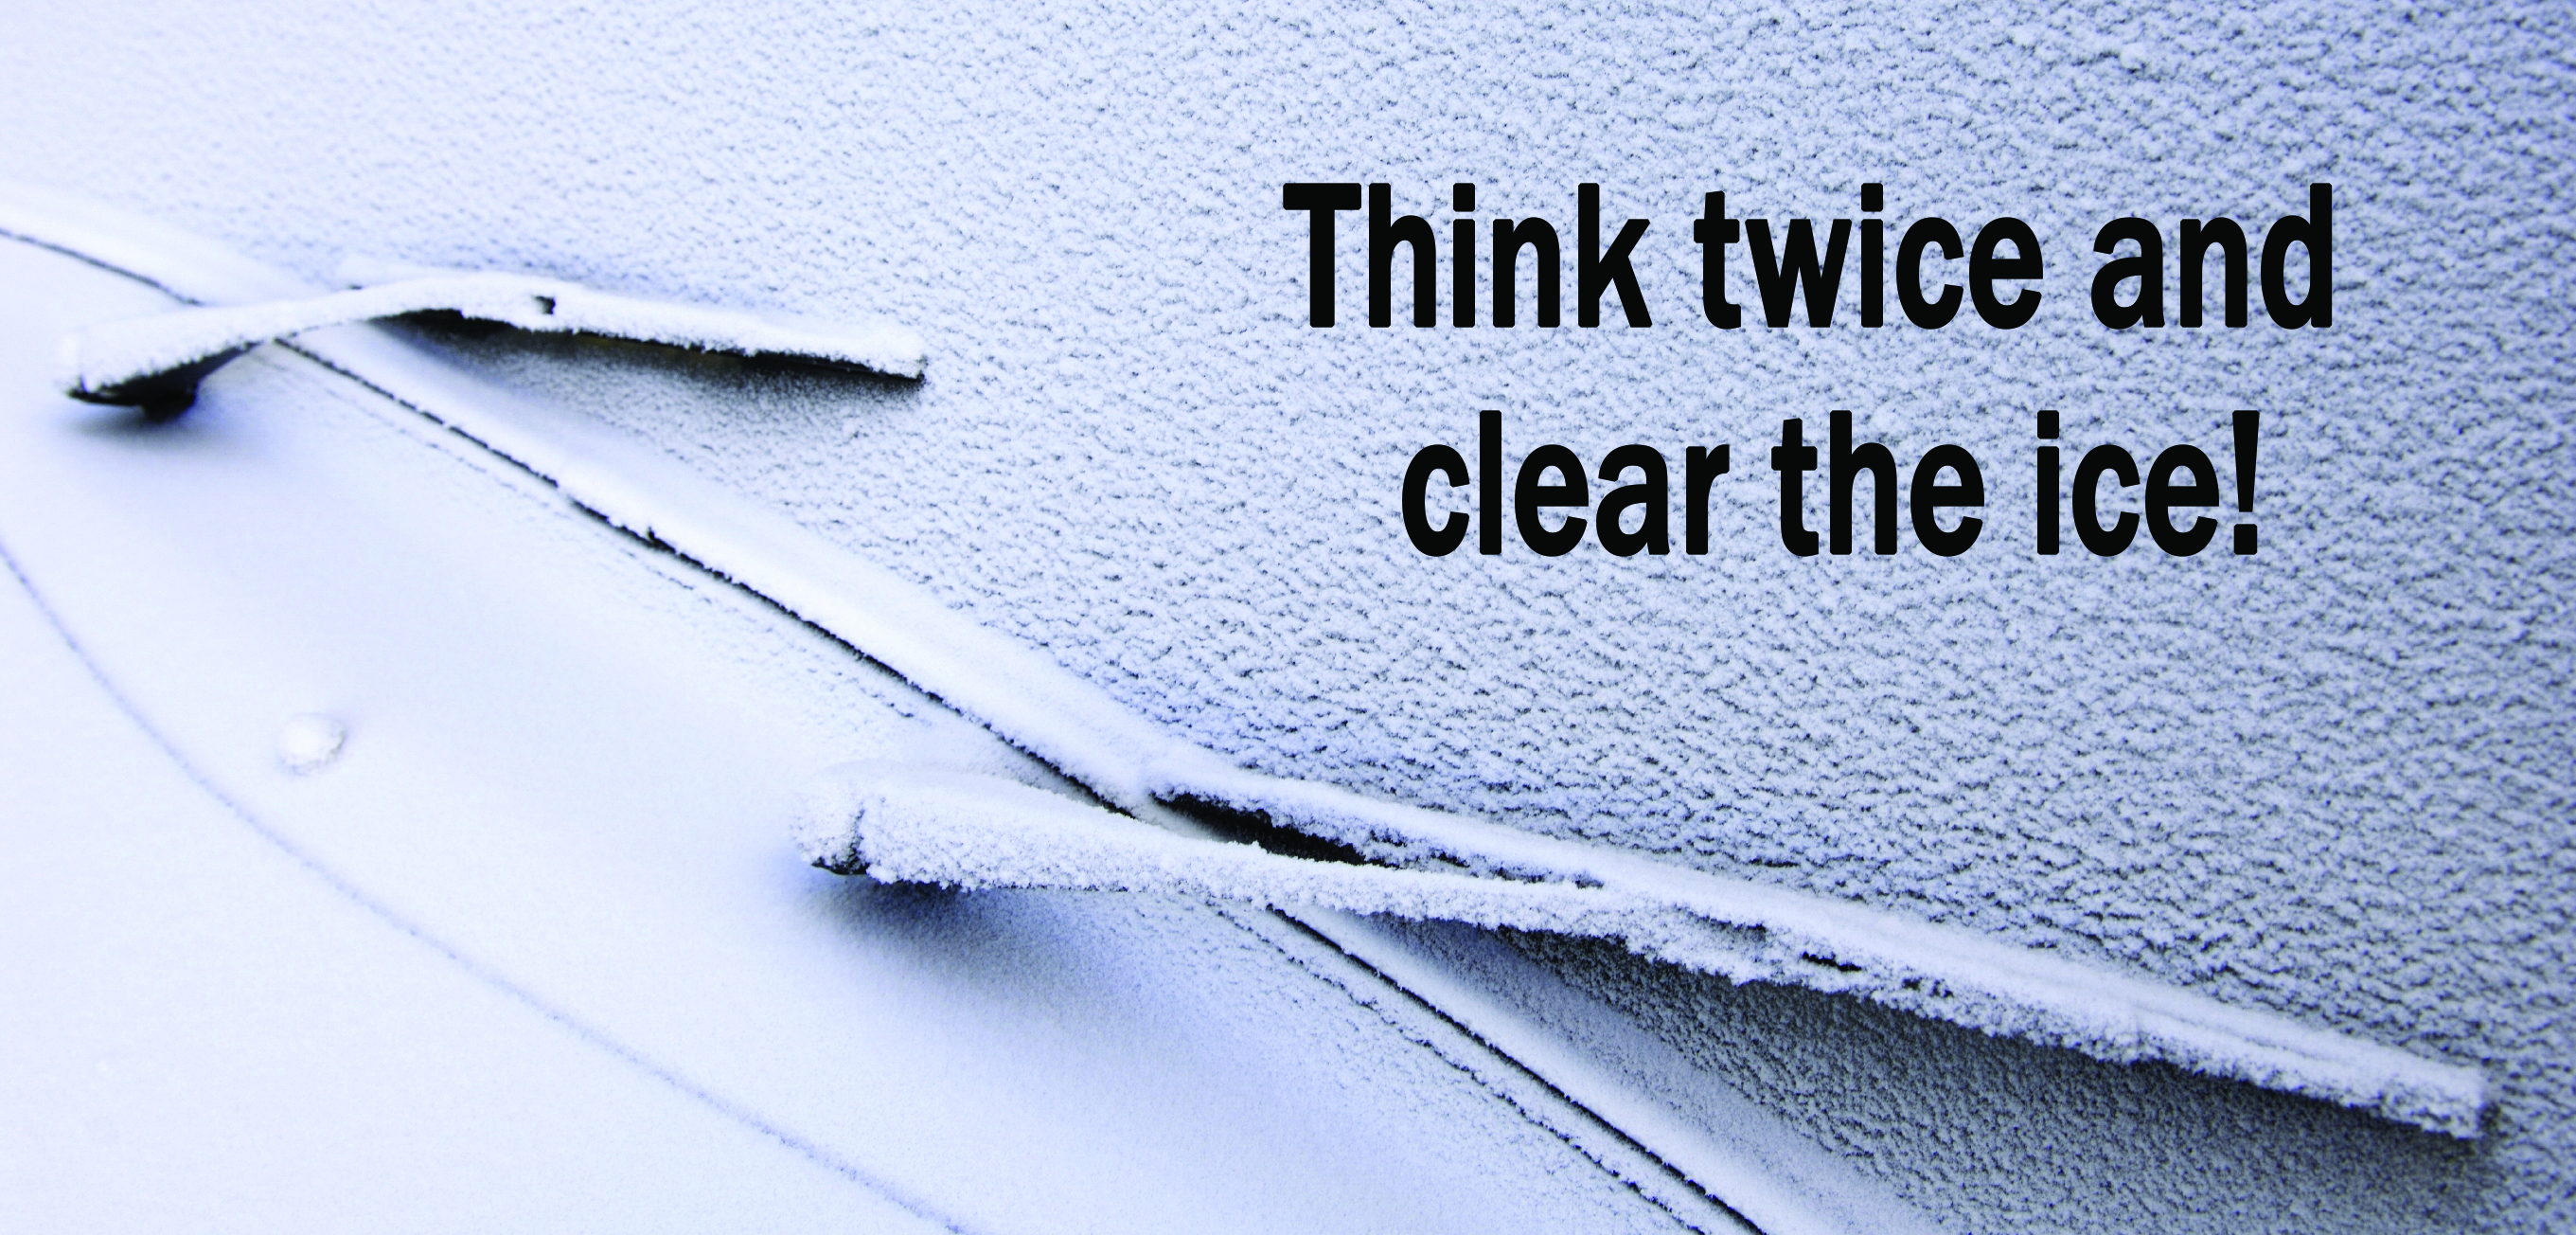 Think twice and clear the ice on car windscreens